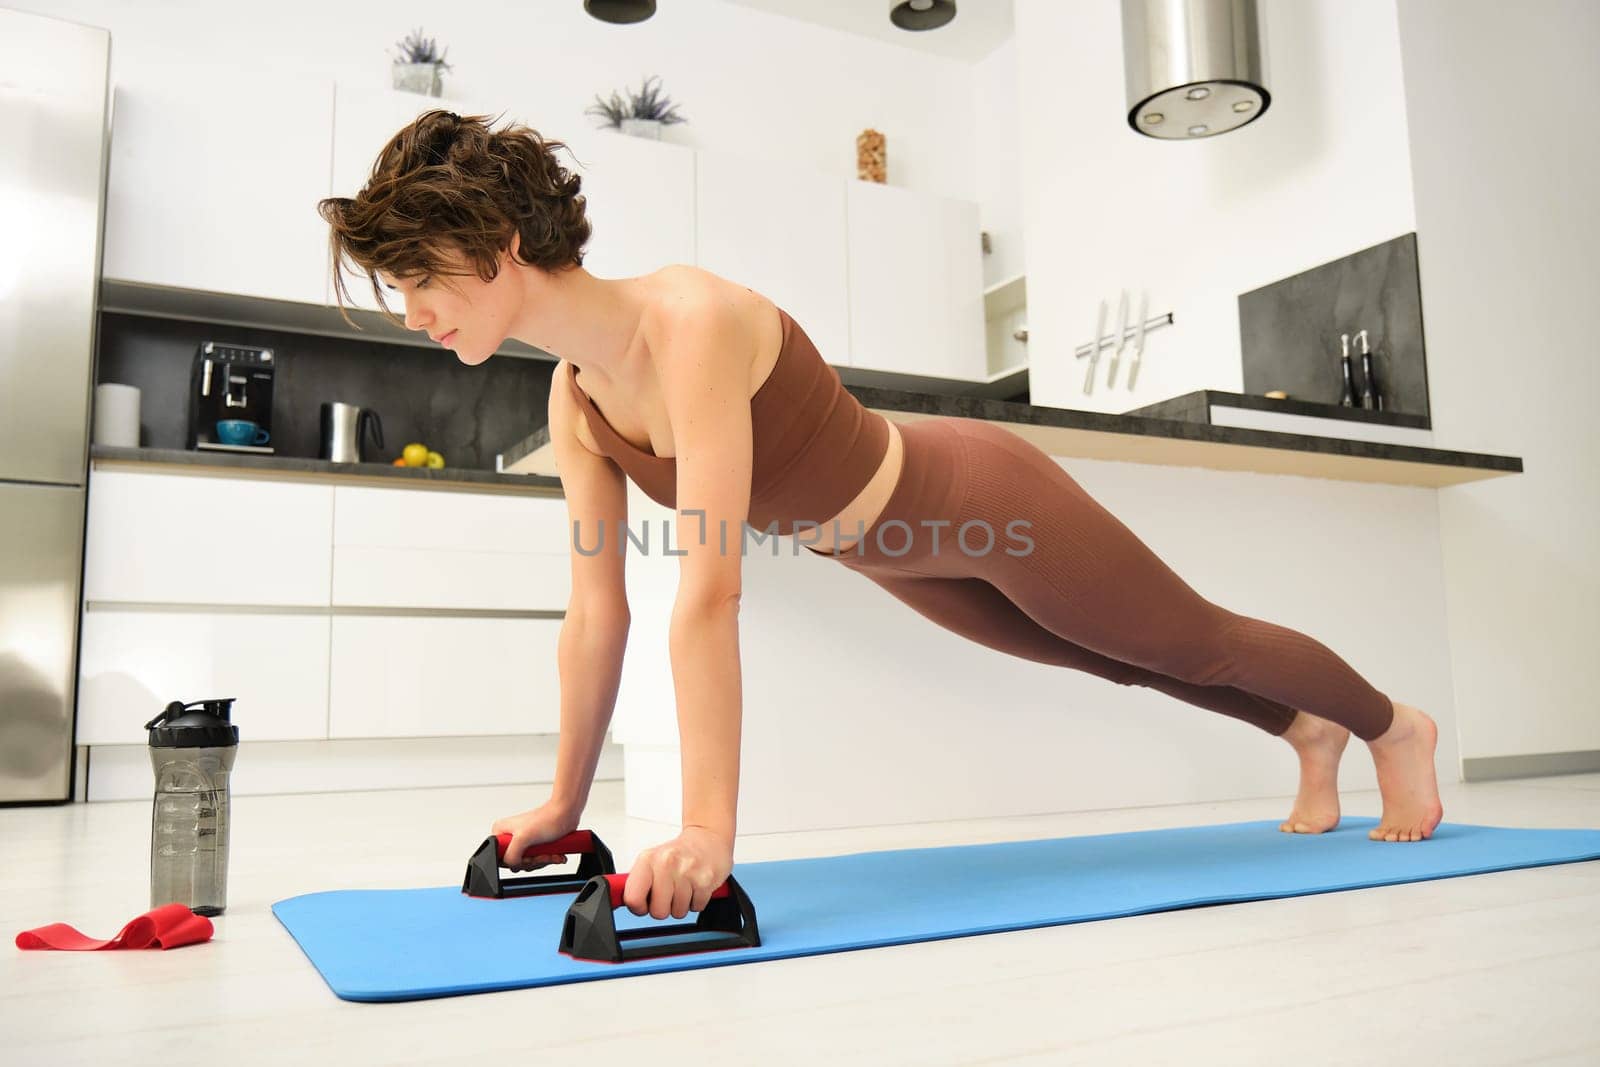 Portrait of young woman in sportswear, workout on yoga rubber mat, stands on push up bars stand for plunk exercises, fitness training session at home.